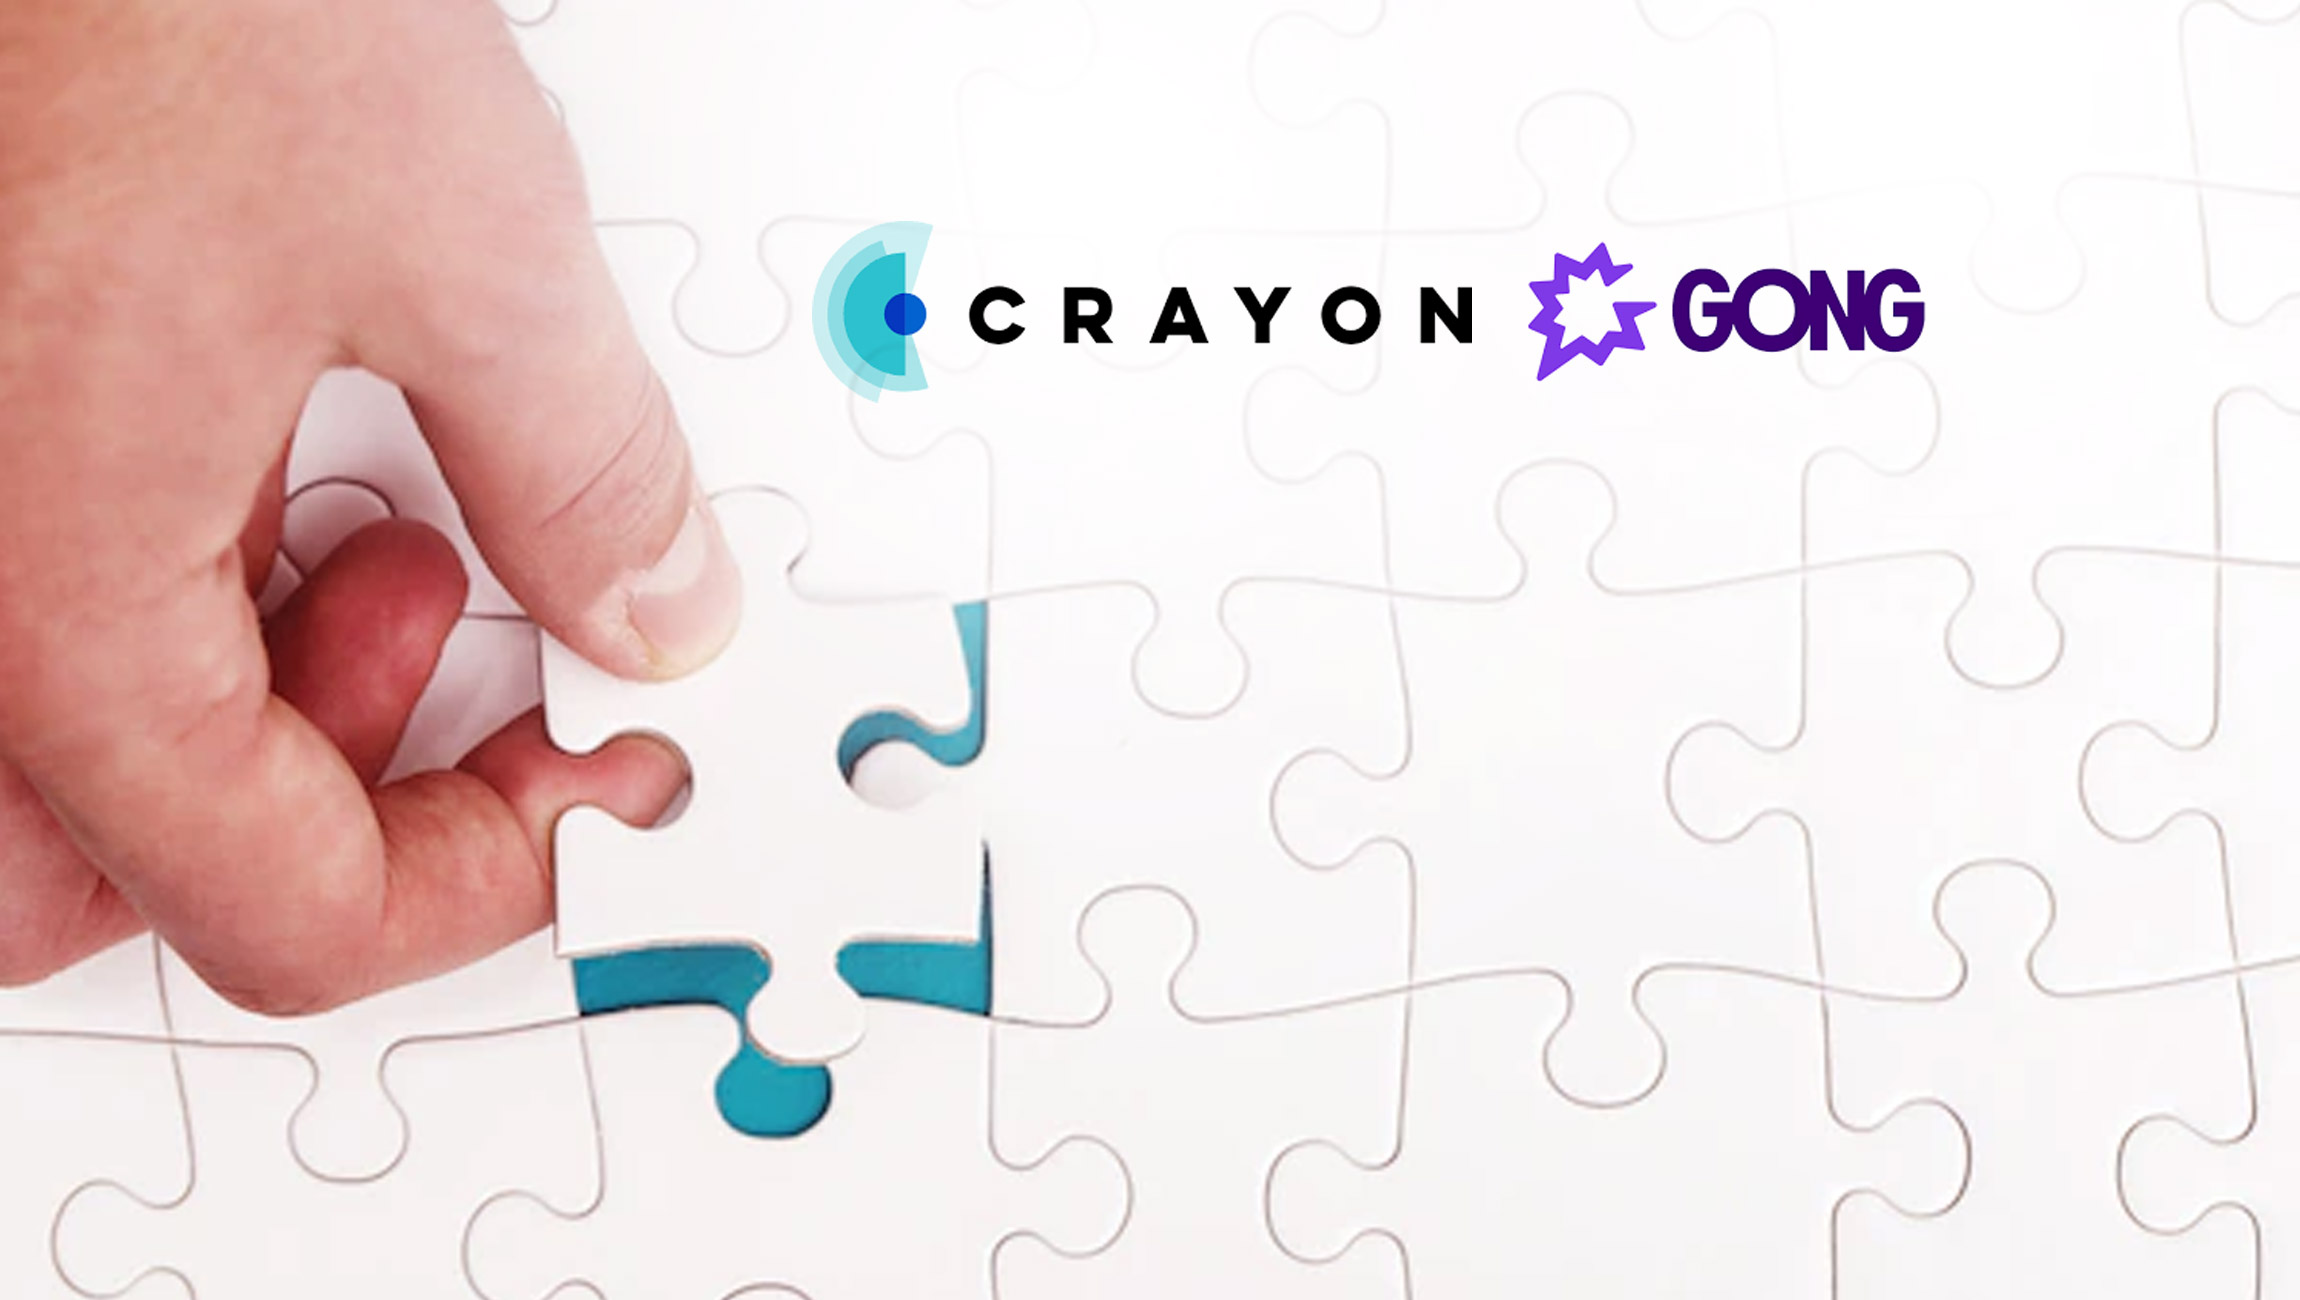 Crayon Announces Integration with Gong to Arm Sales Teams with High-Value Competitive Insights to Secure More Wins